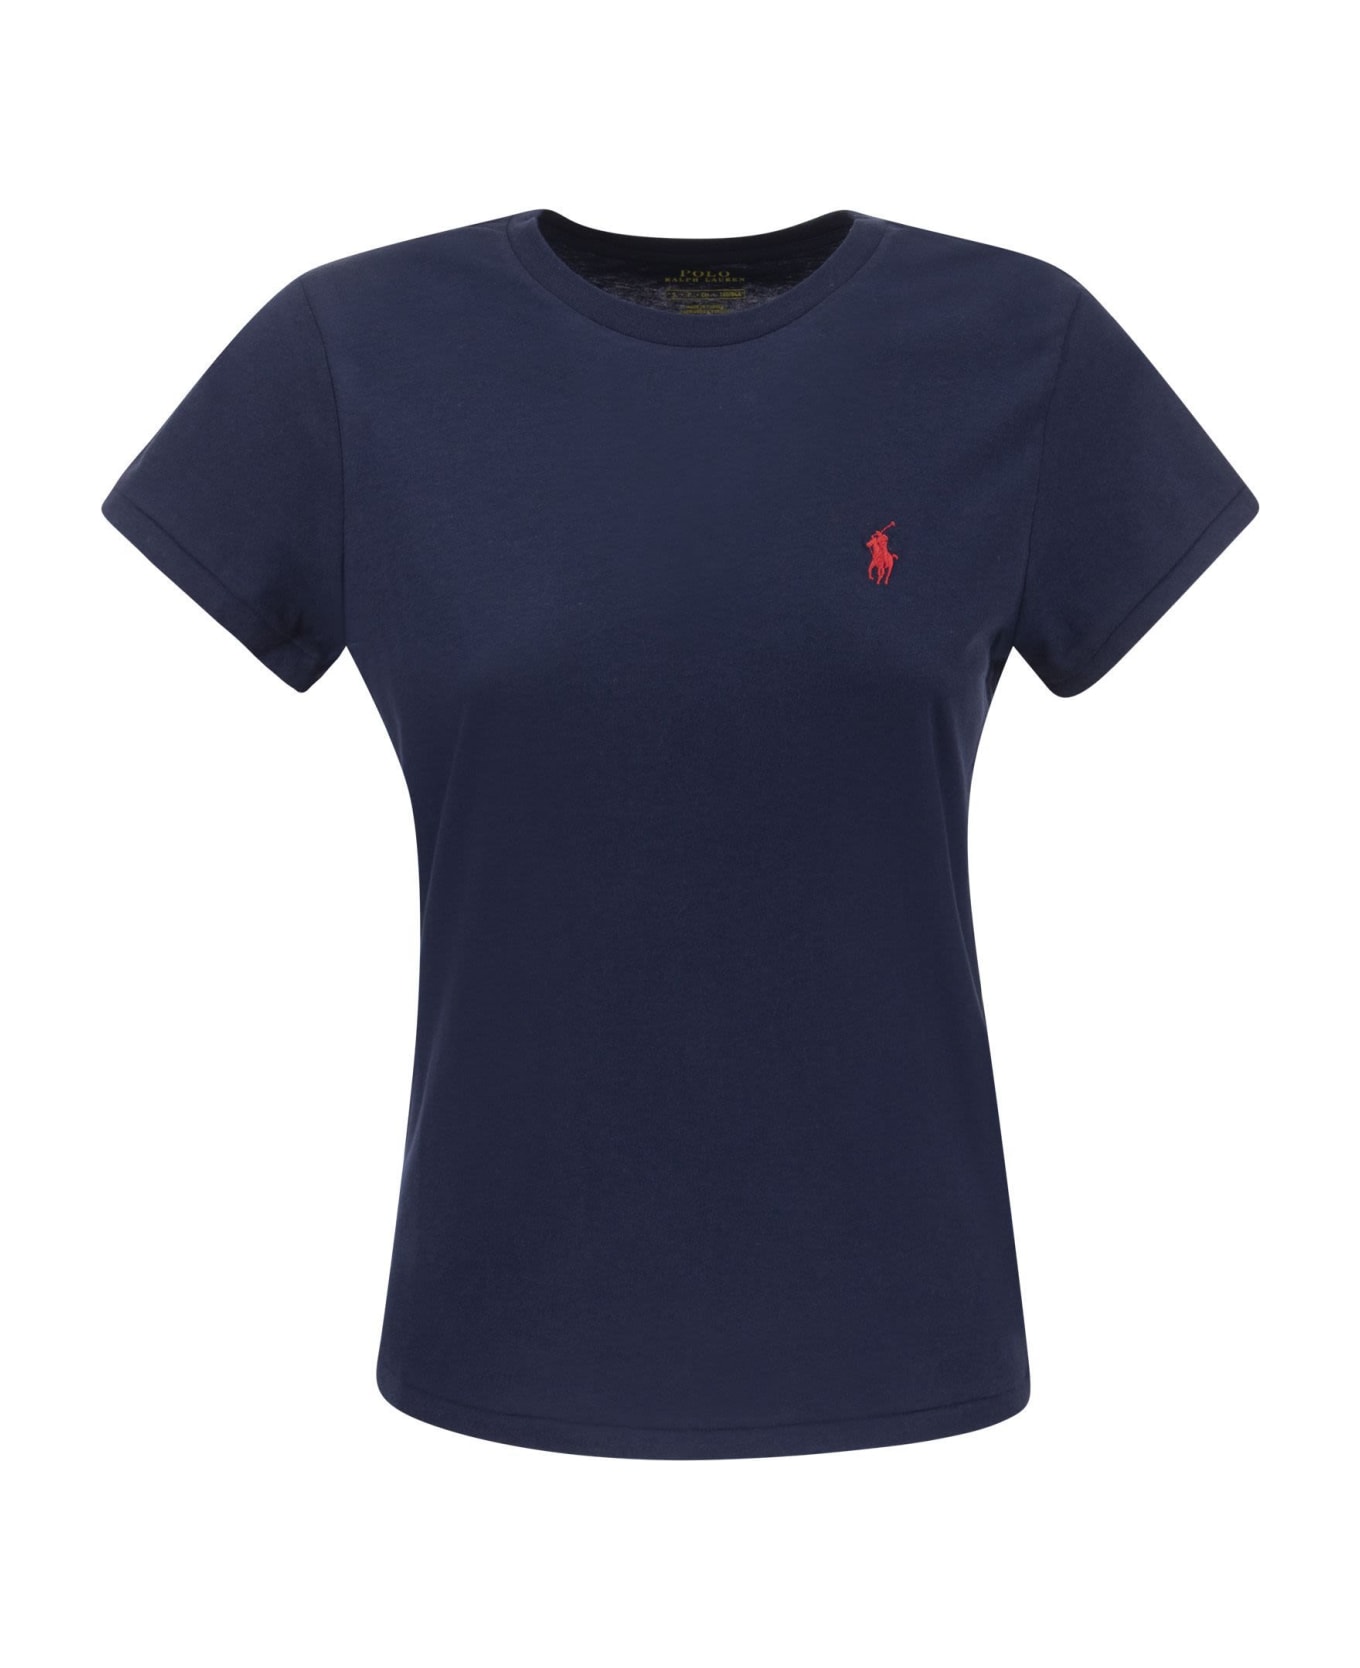 Polo Ralph Lauren Cotton T-shirt With Embroidered Logo - Blue Tシャツ